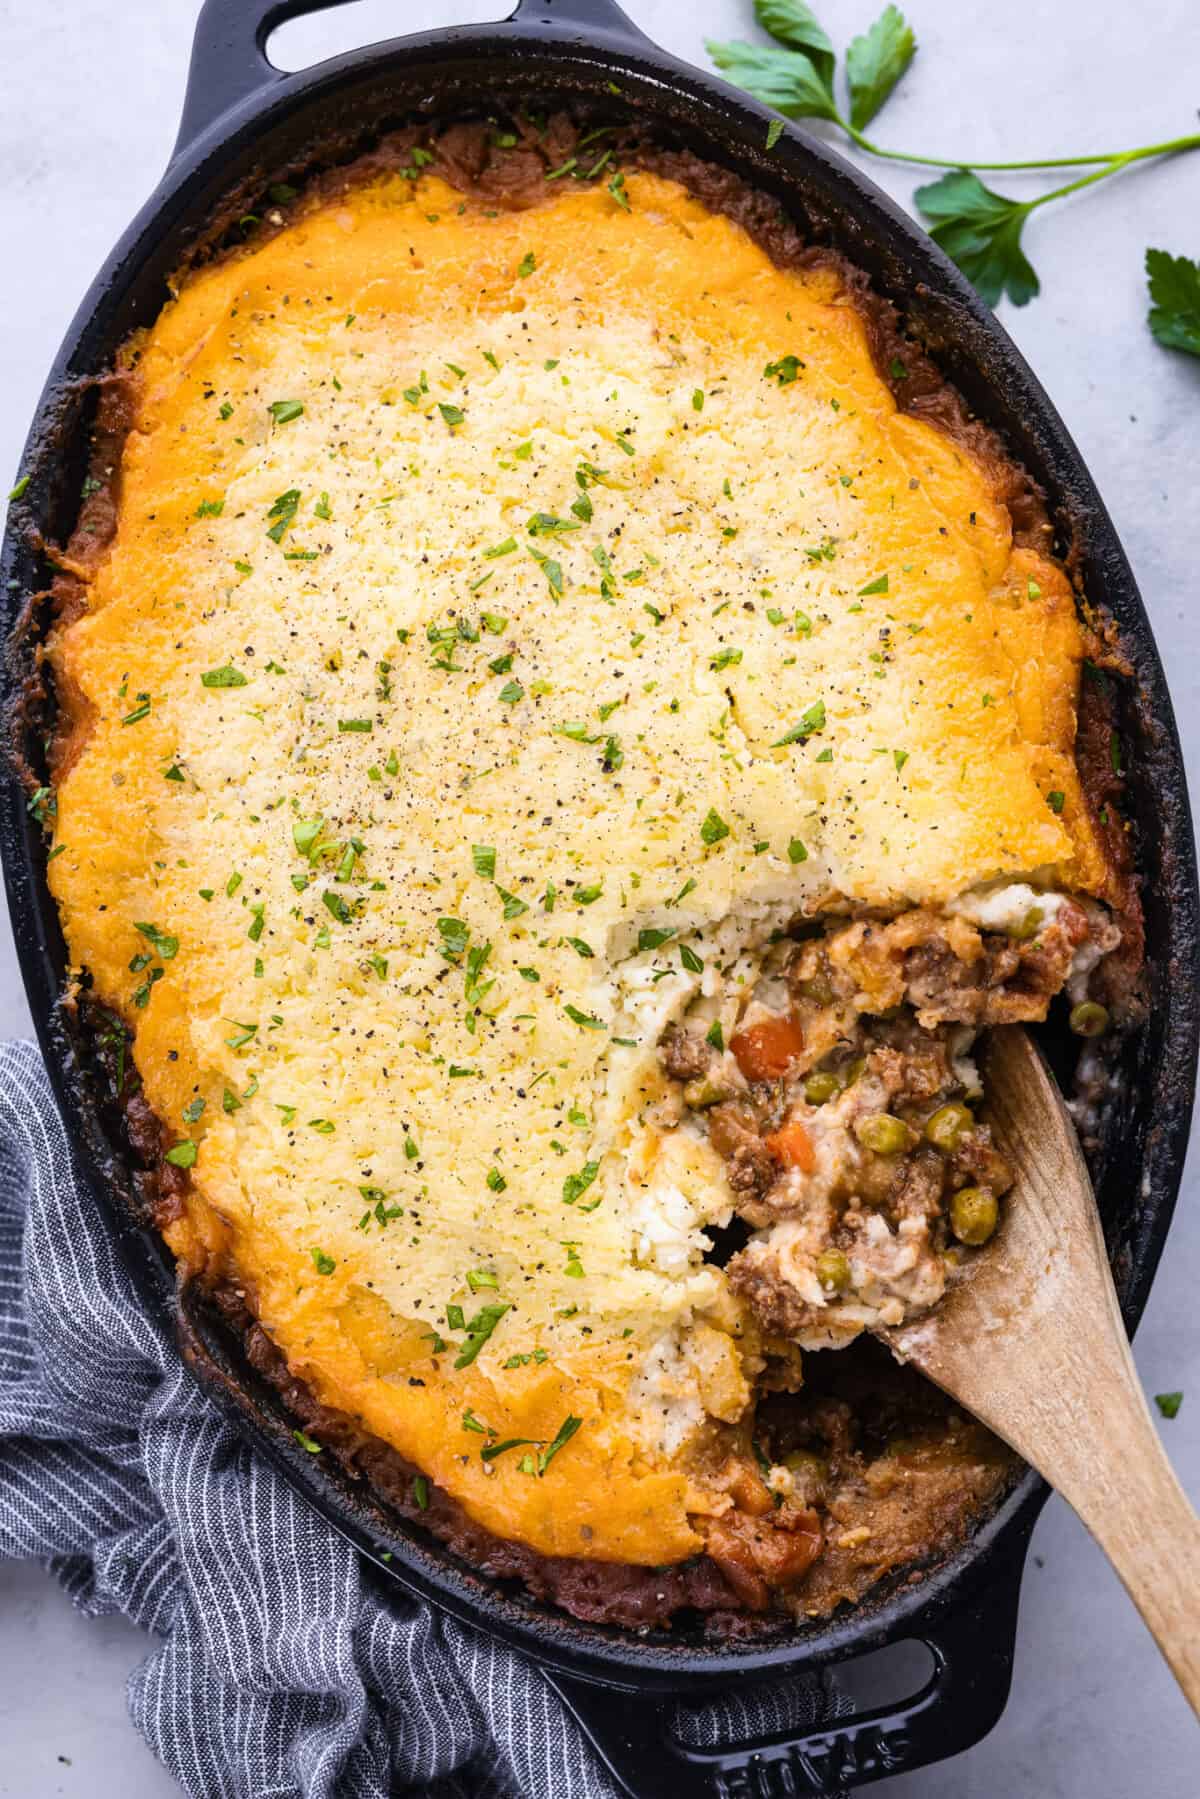 Top-down view of shepherd's pie in a baking dish with a scoop taken out of it.